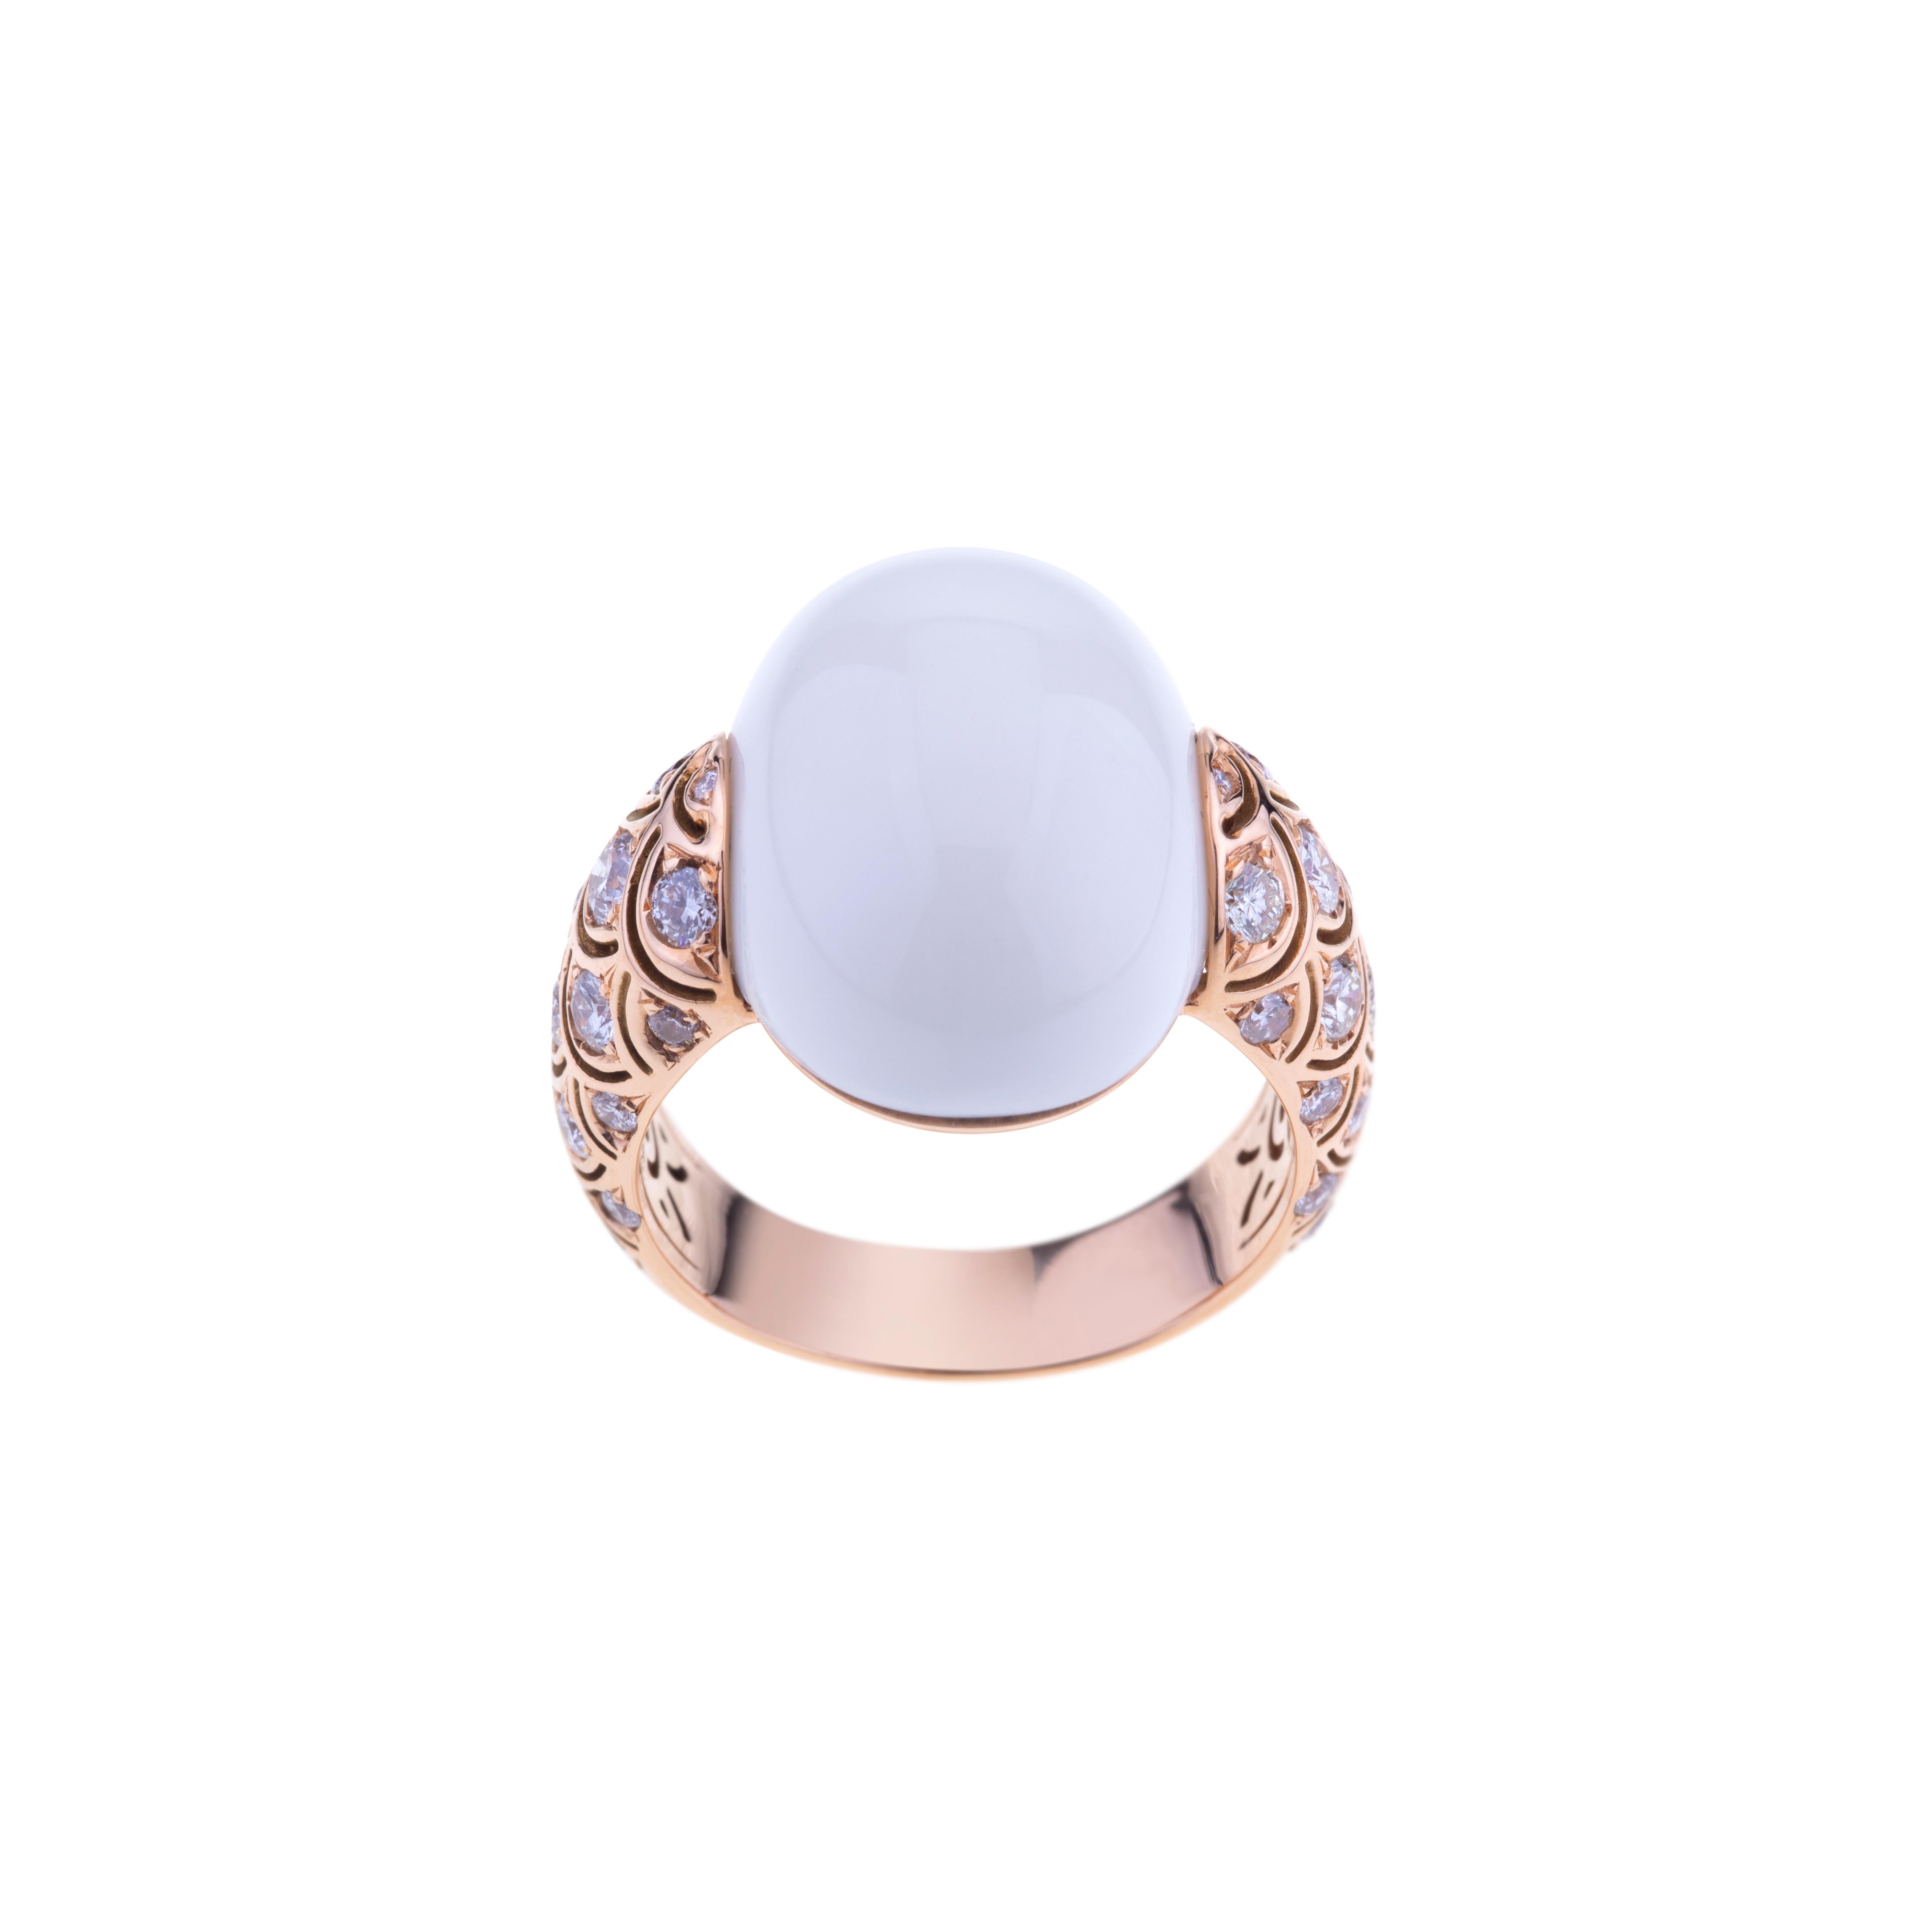 Embrace by Angeletti. Rose Gold Ring With Ceramic Cabochon and Diamonds.
New Model with Ceramic Cabochon and Waves of Diamonds on the Side (ct. 080 f-vvs).
Designed and Manifactured in Rome. 18kt Gold Weight is Around 8 Grams.
The Size is